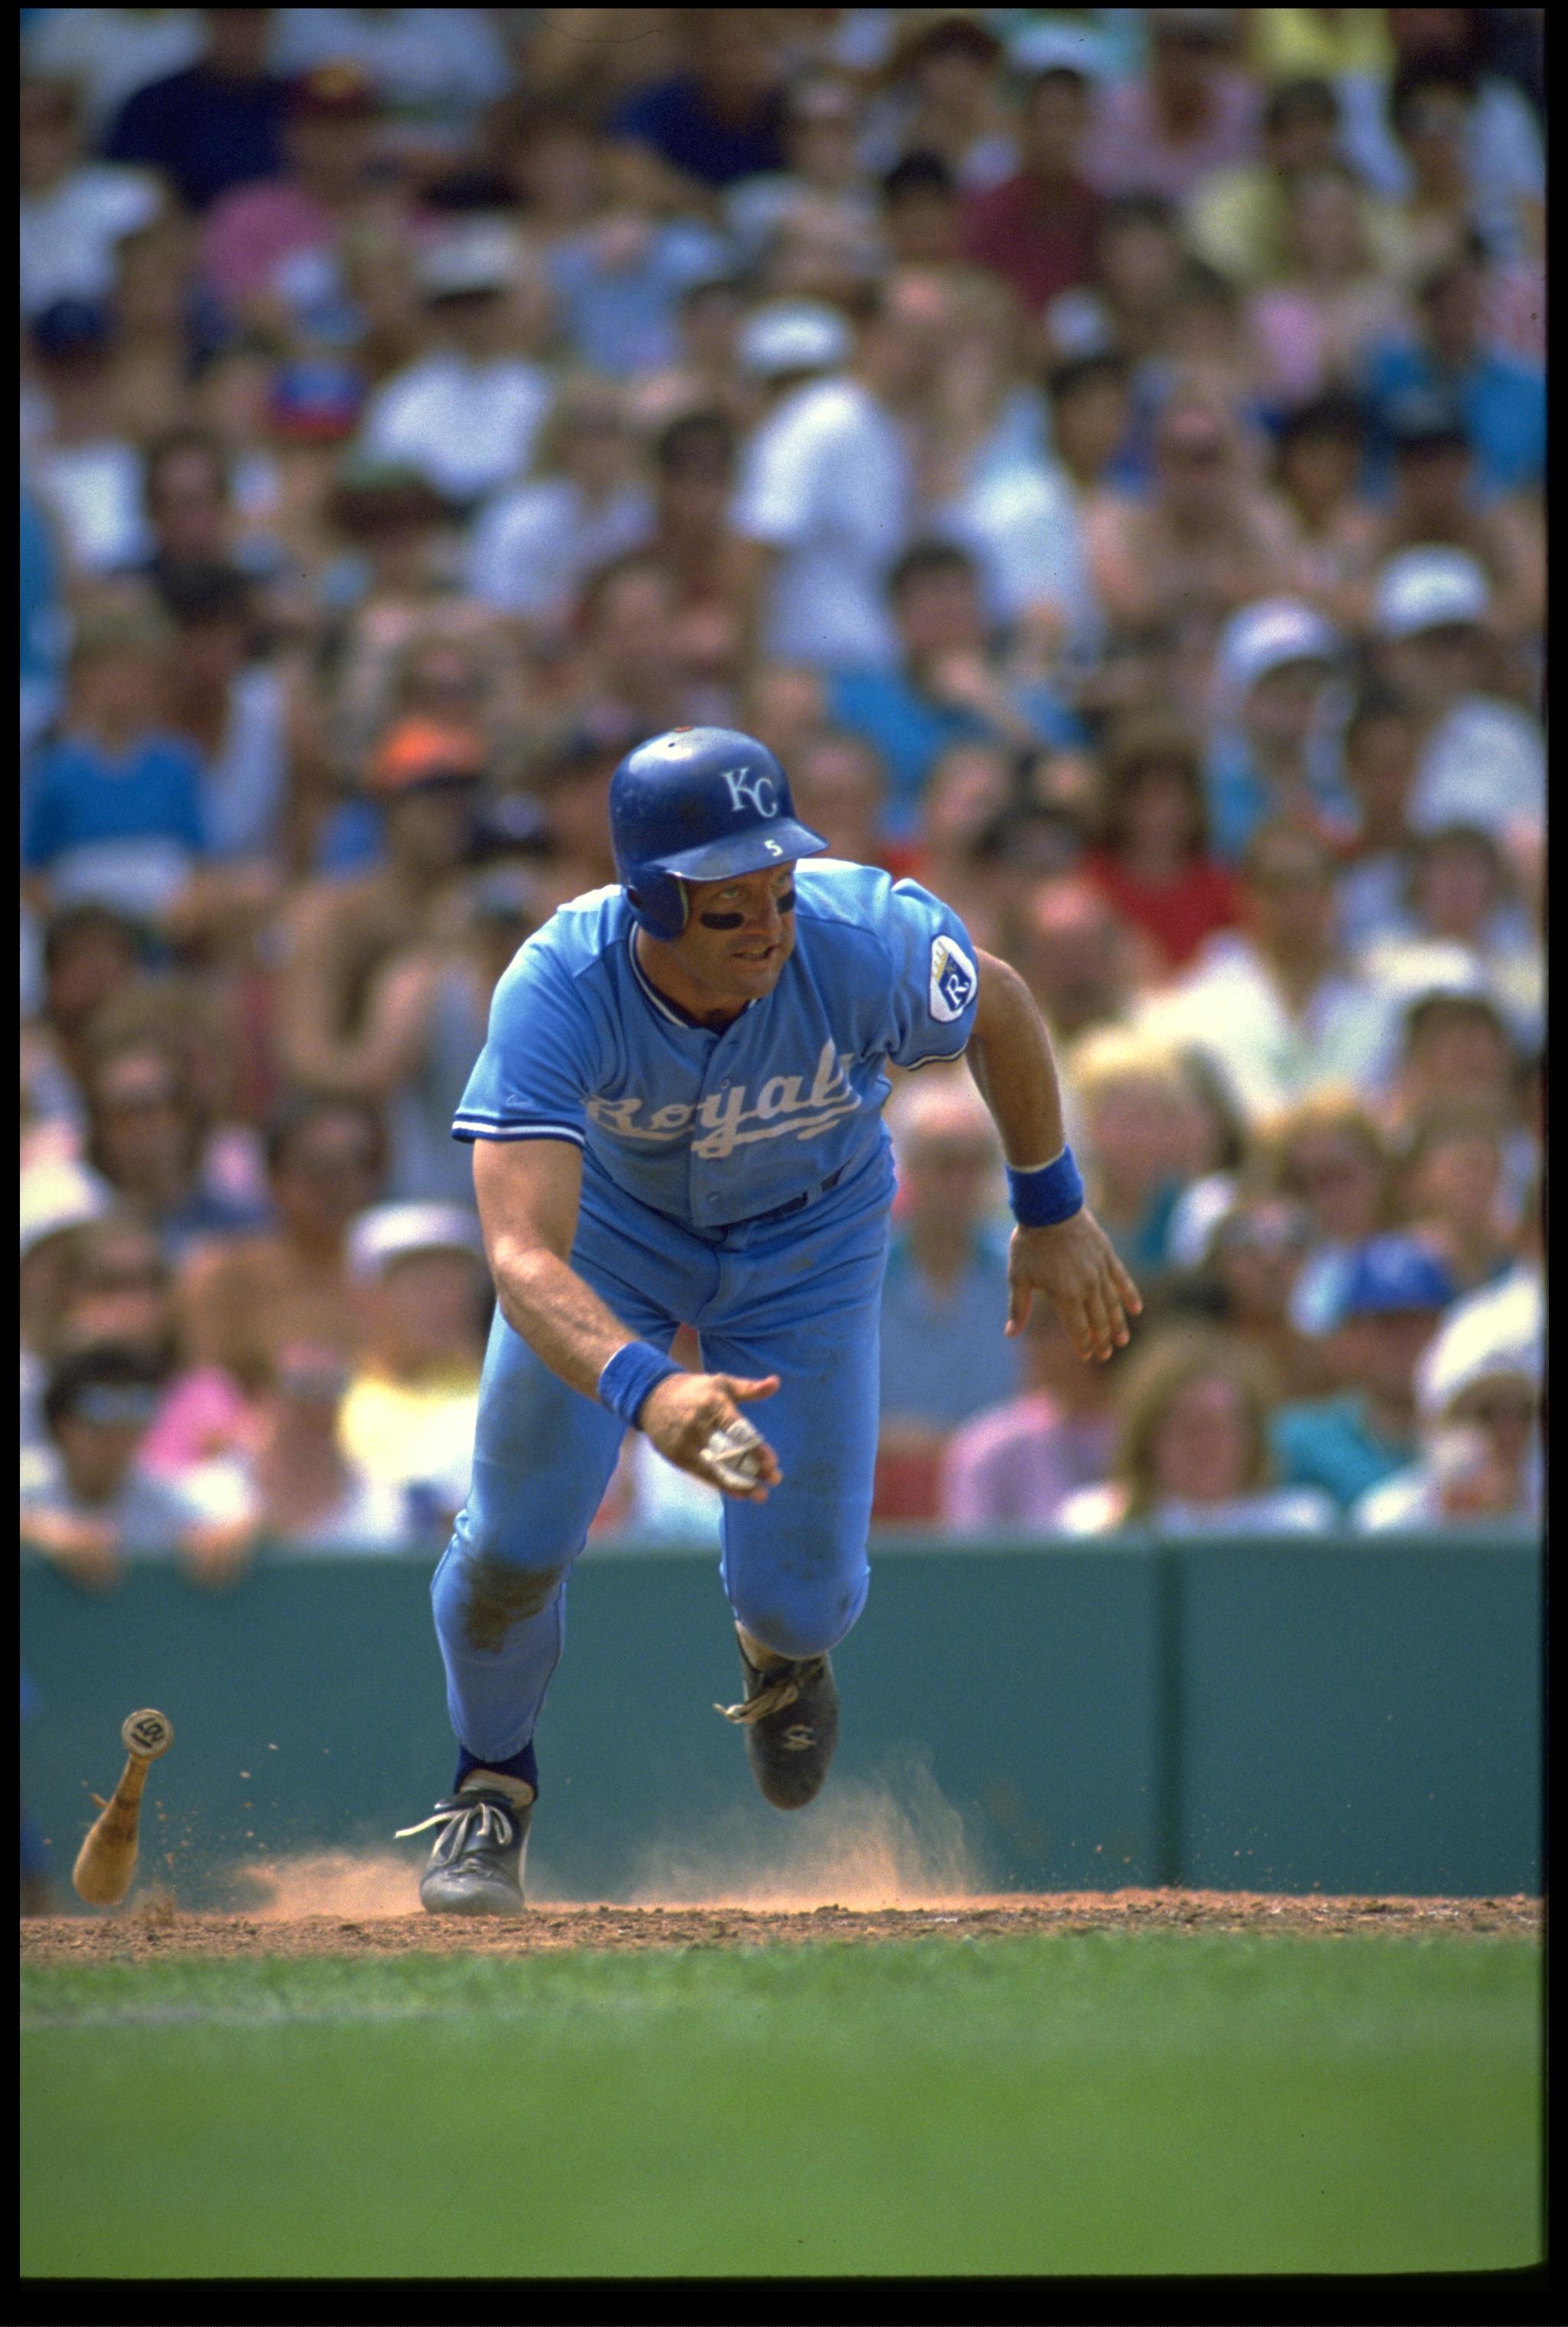 1990:  KANSAS CITY ROYALS INFIELDER GEORGE BRETT RUNS TO FIRST BASE AFTER MAKING CONTACT WITH A PITCH DURING THE ROYALS GAME AT ROYALS STADIUM IN KANSAS CITY, MISSOURI.